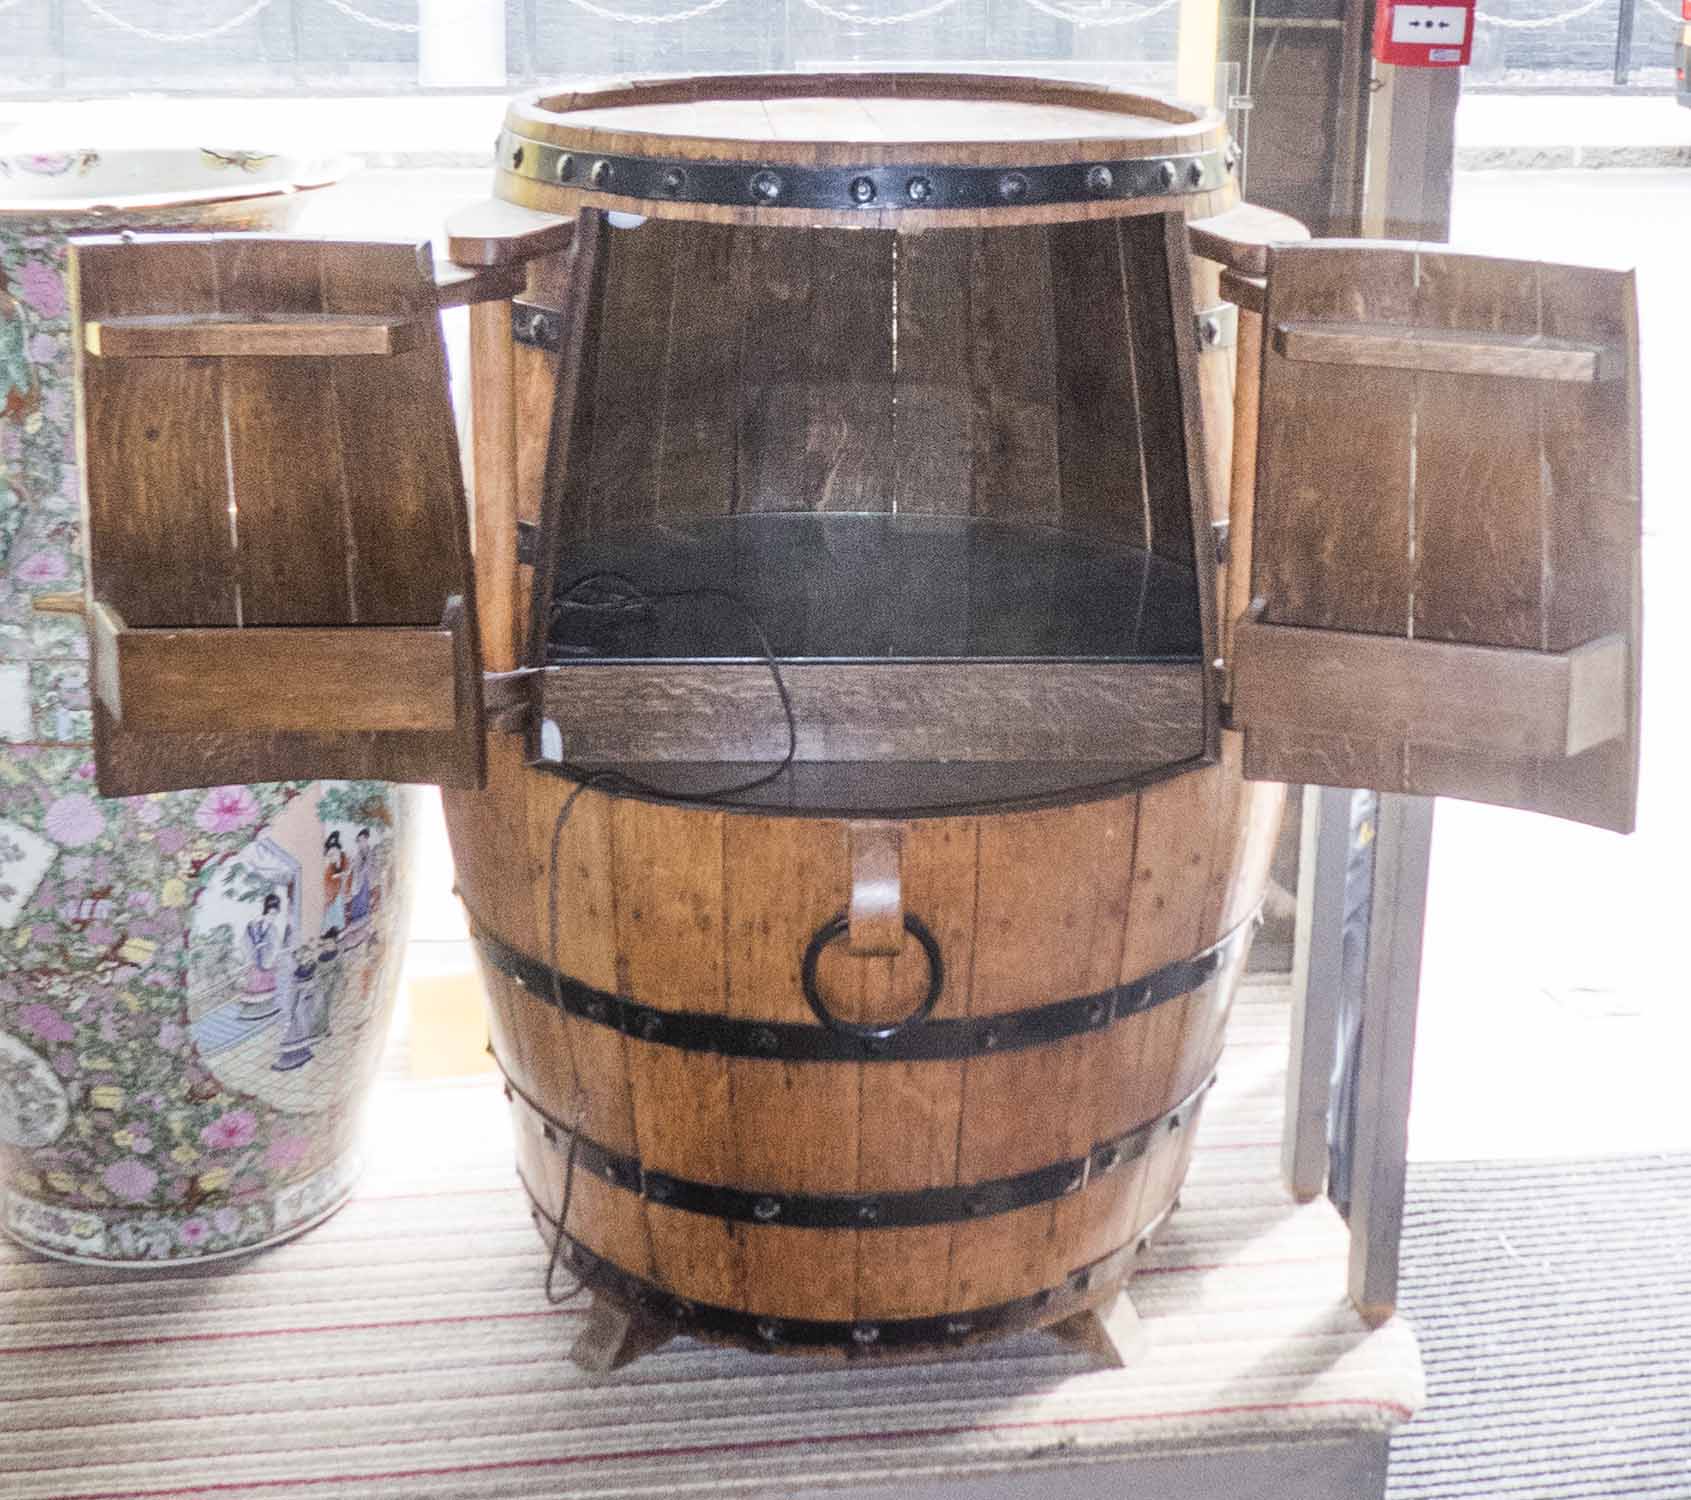 WINE BARREL BAR, with central opening compartment with light up interior, 101cm H x 60cm diam. - Image 2 of 3